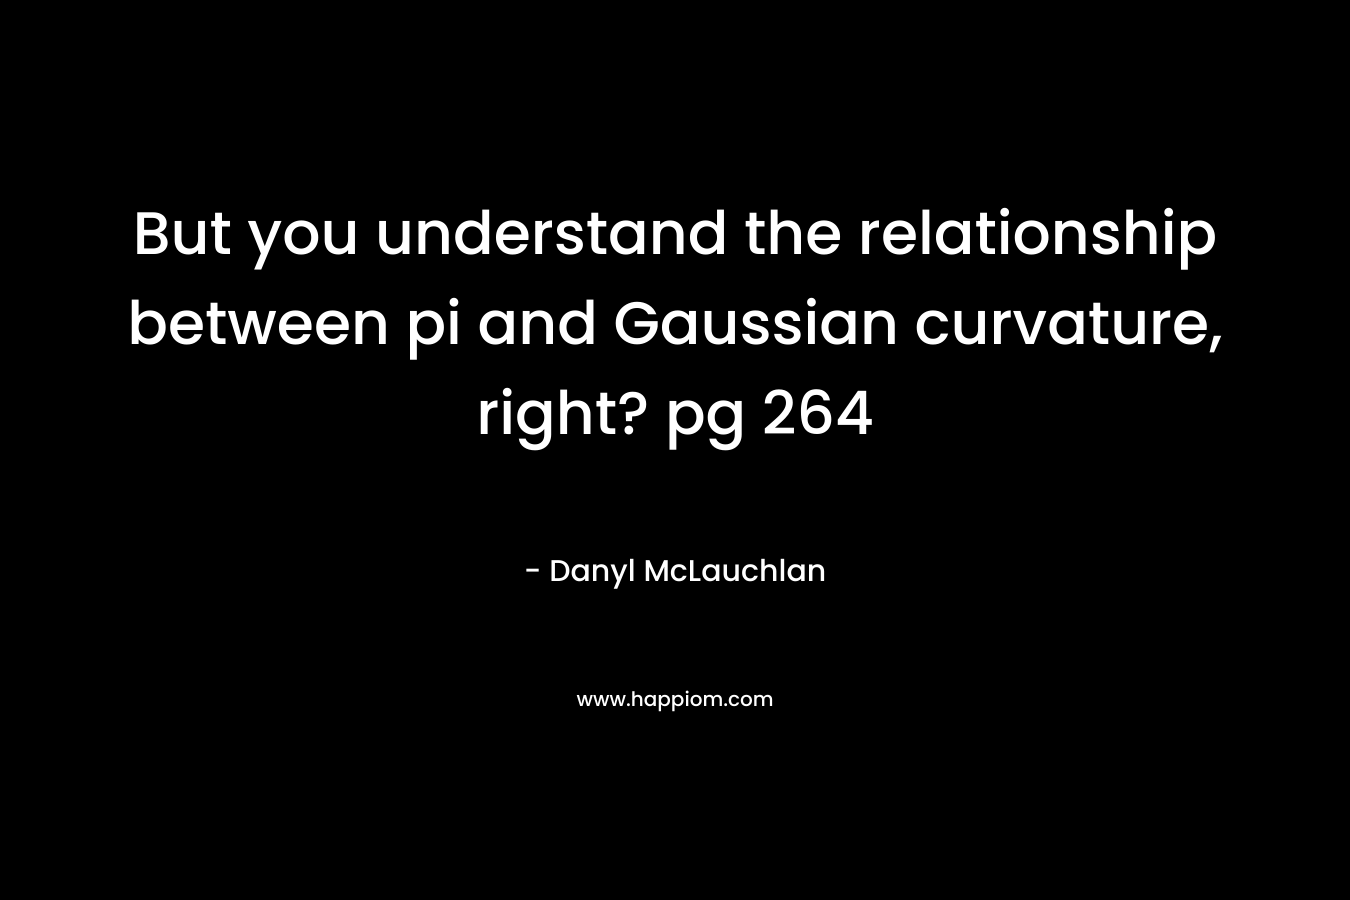 But you understand the relationship between pi and Gaussian curvature, right? pg 264